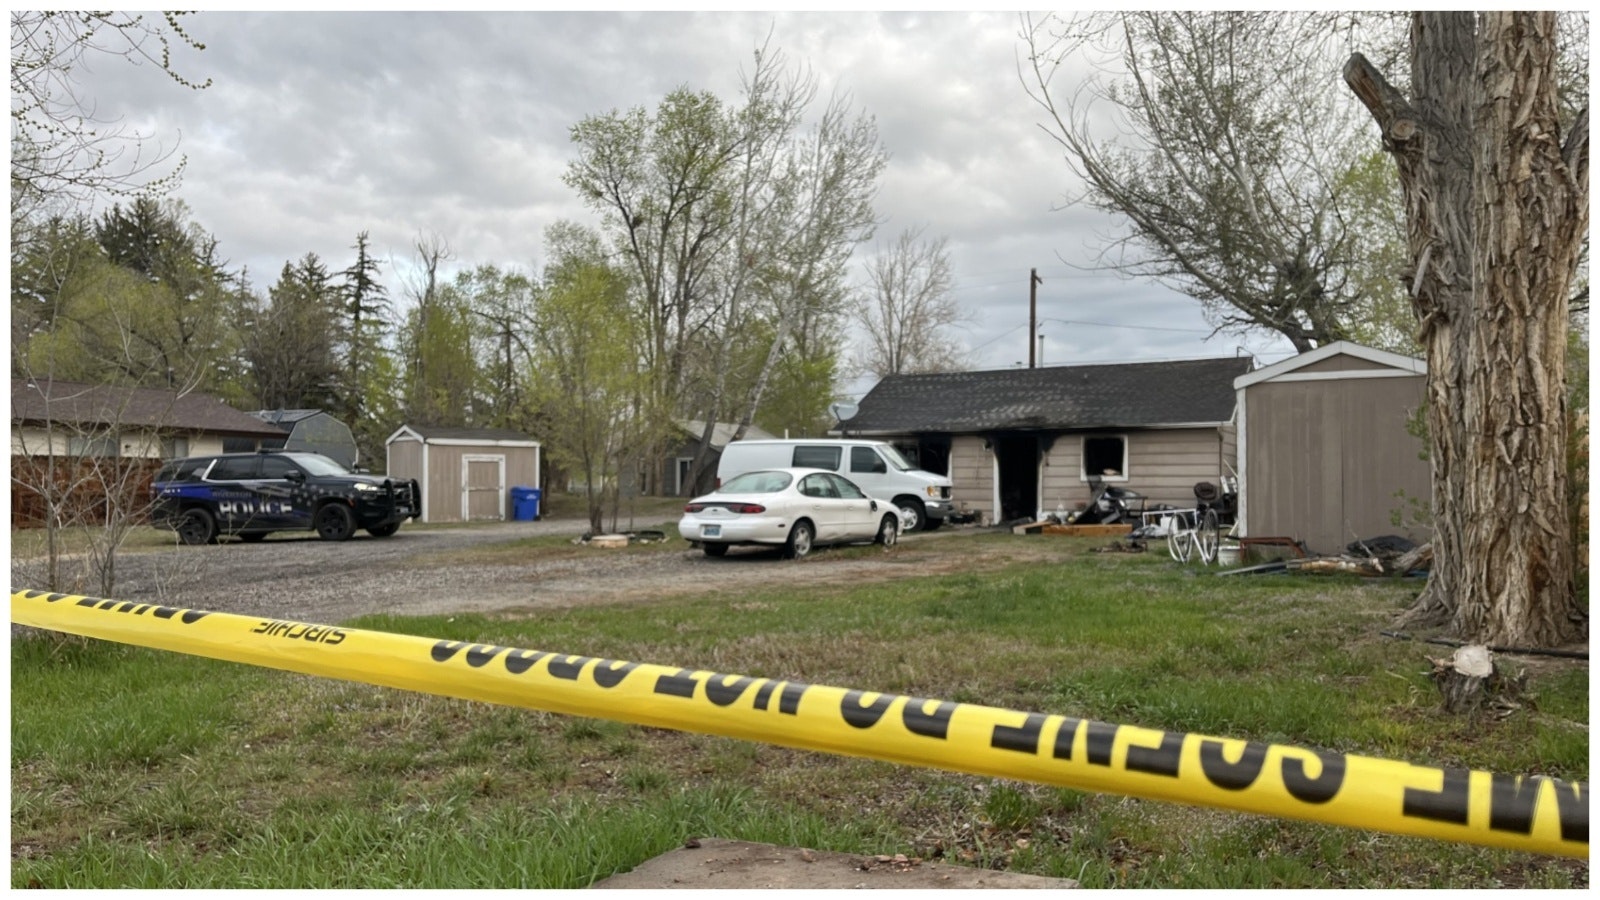 Rain misted on the charred Riverton home early Friday, five hours after emergency personnel found a deceased person inside it.